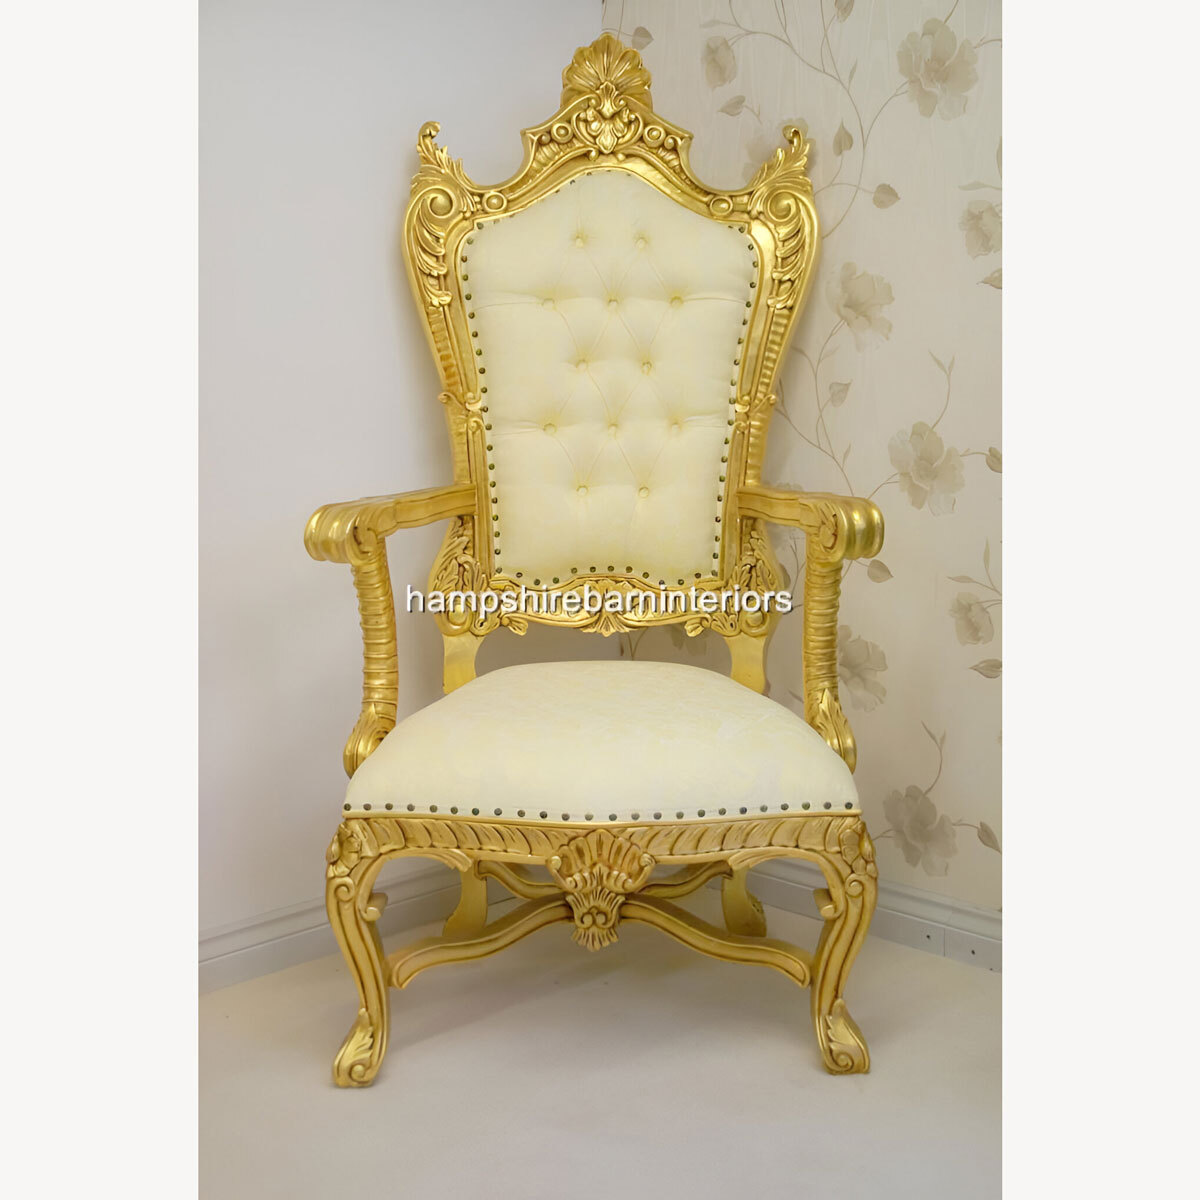 Large Kings Throne Chair In Gold And Cream Fabric 1 - Hampshire Barn Interiors - Large Kings Throne Chair In Gold And Cream Fabric -